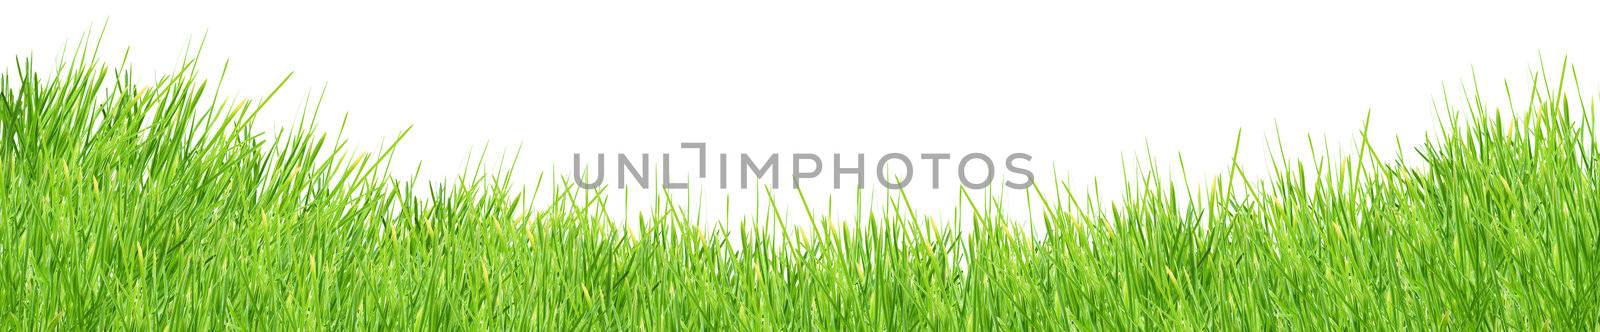 Isolated green grass on a white background